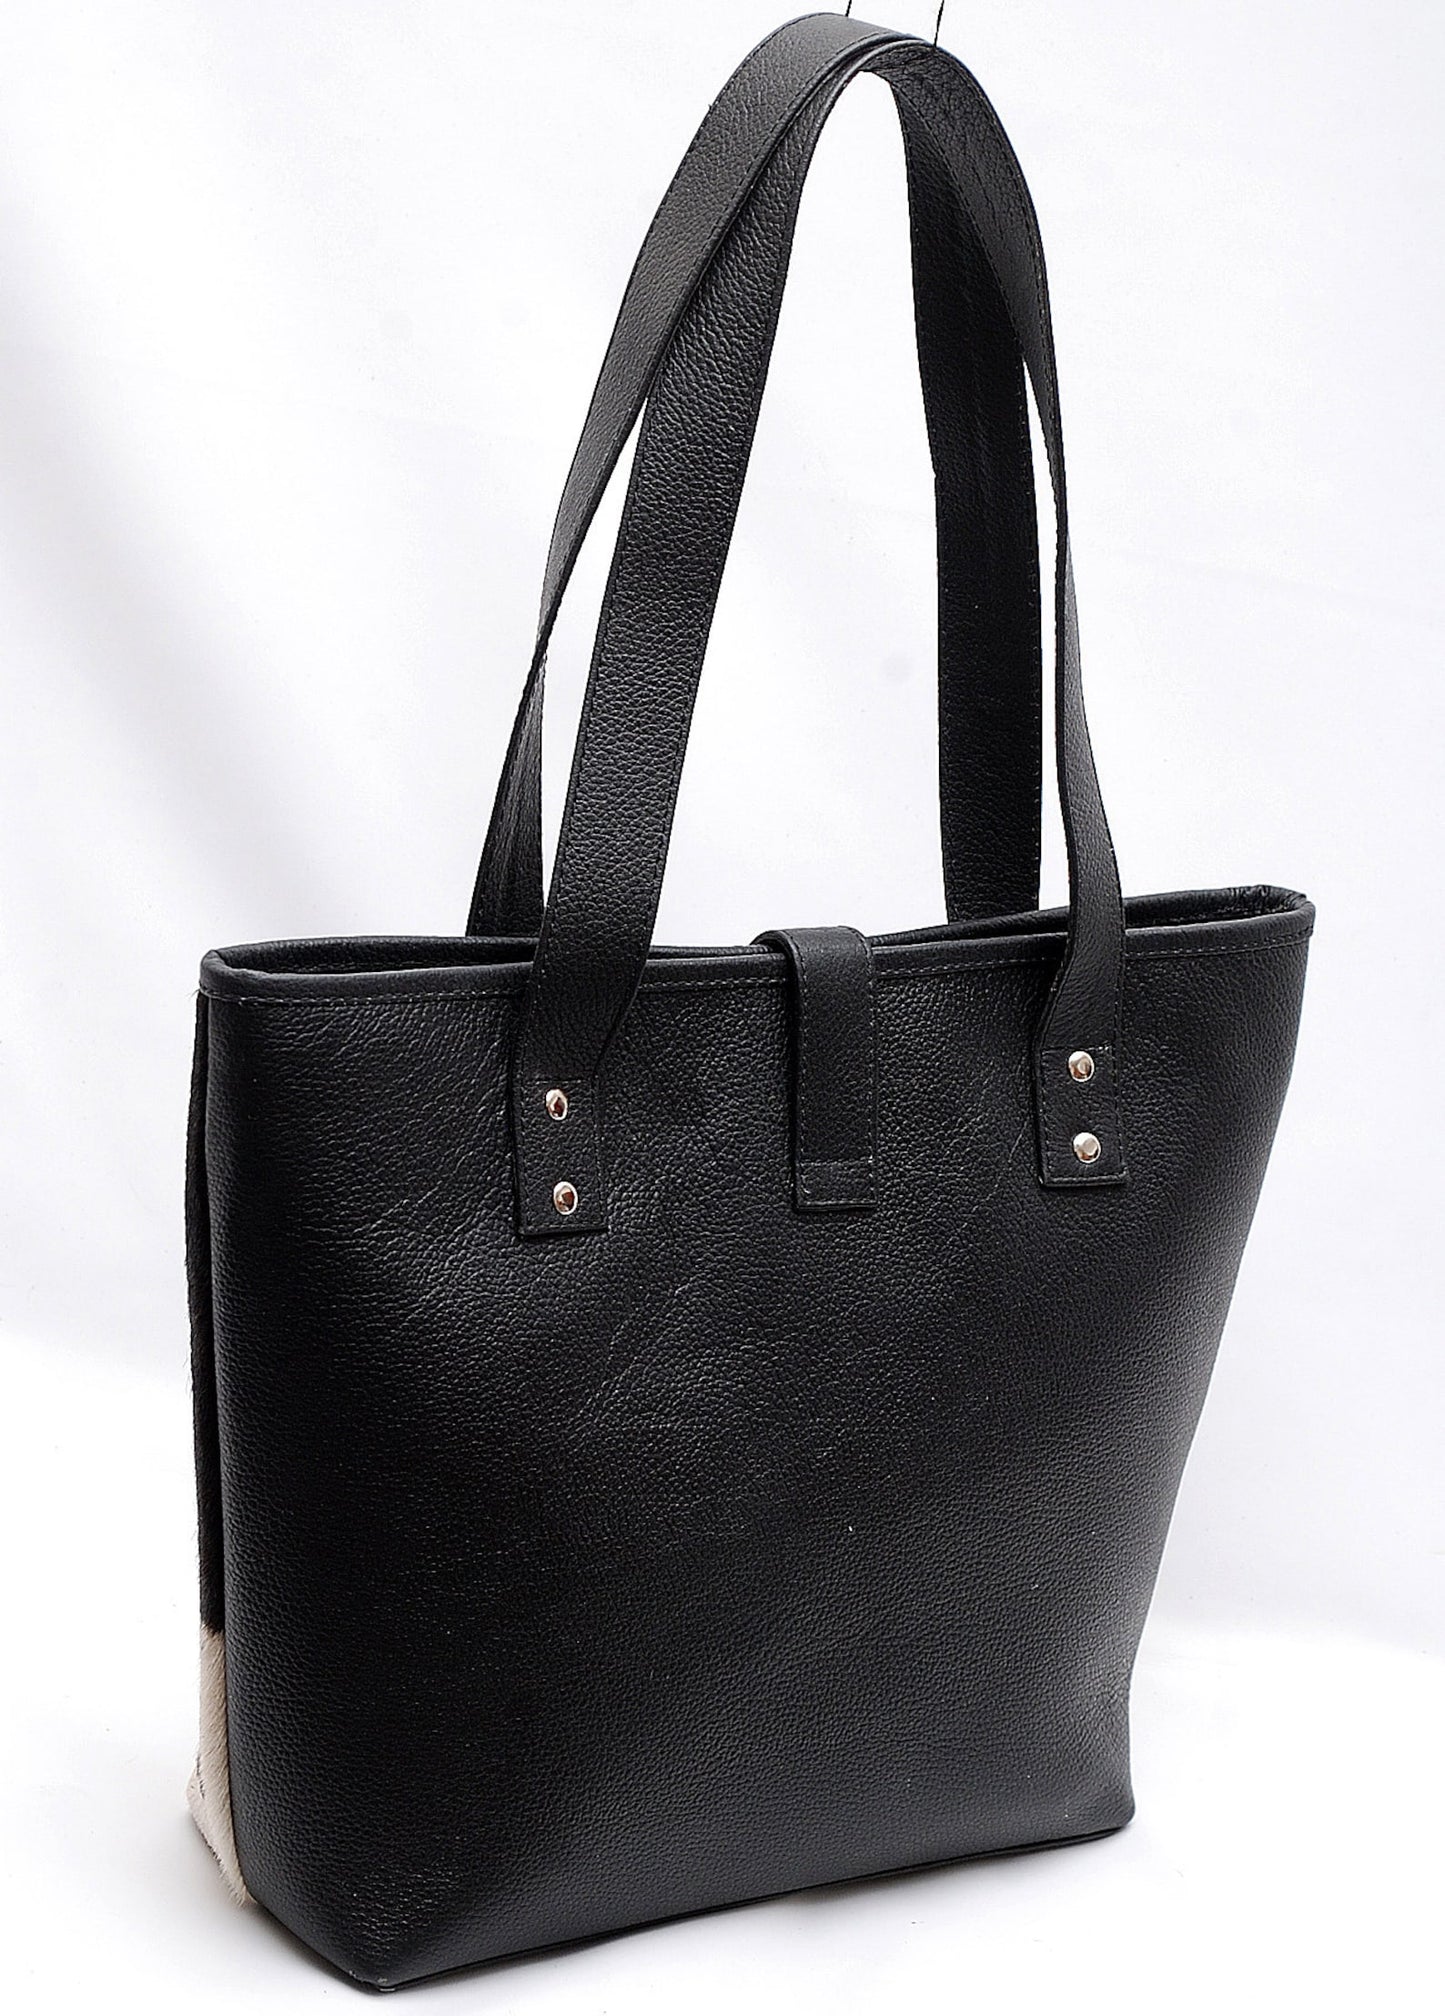 Find your perfect cowhide bag at our store.